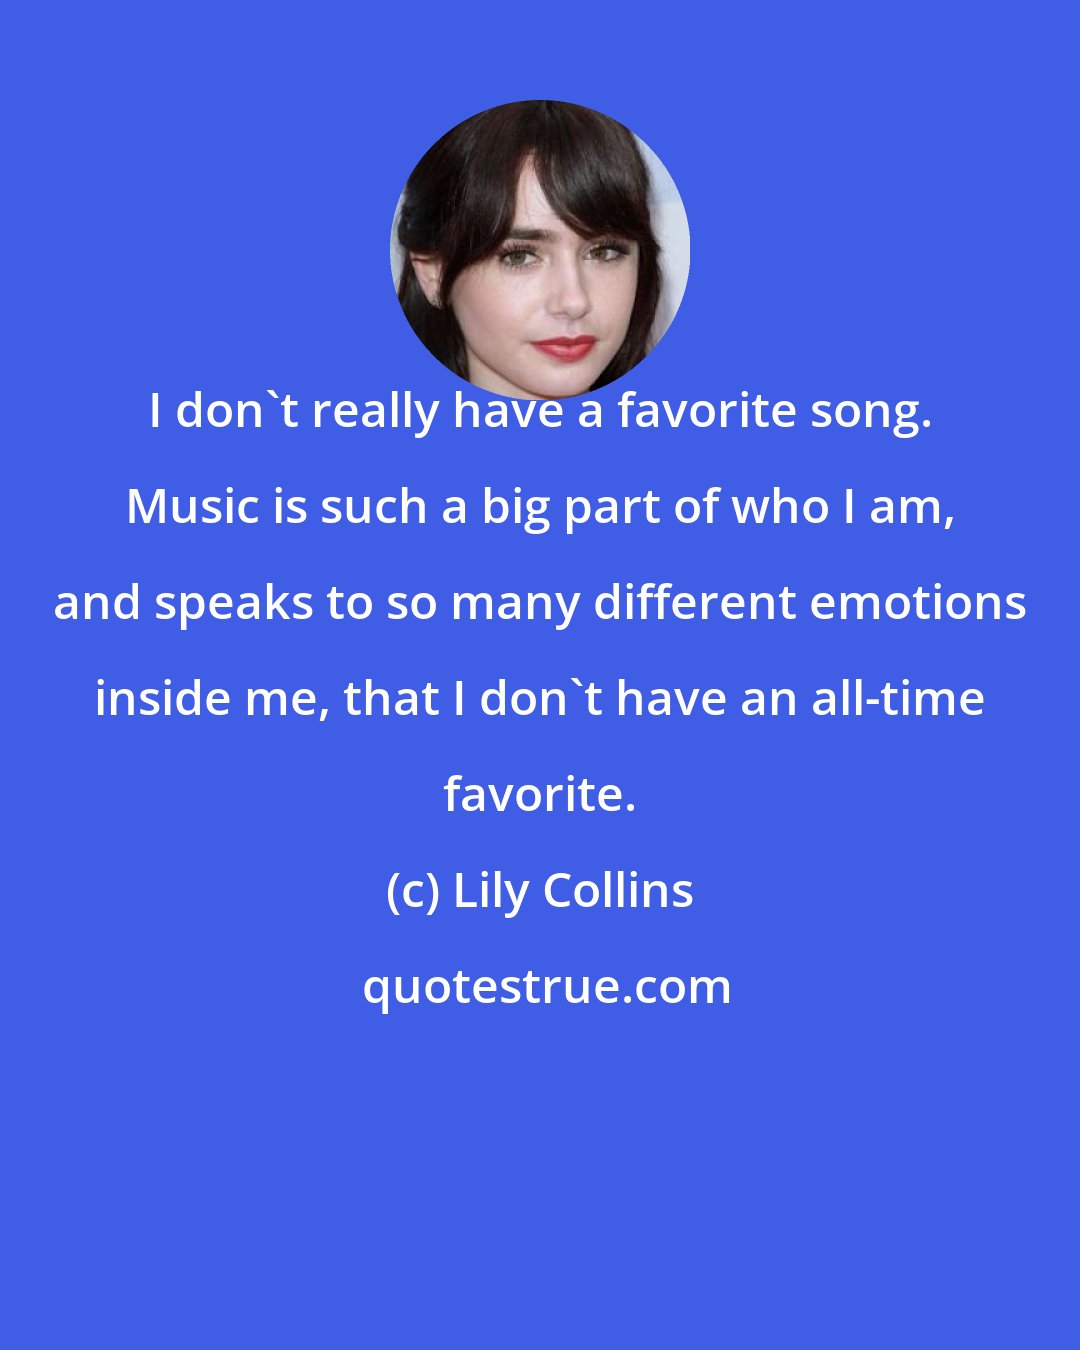 Lily Collins: I don't really have a favorite song. Music is such a big part of who I am, and speaks to so many different emotions inside me, that I don't have an all-time favorite.